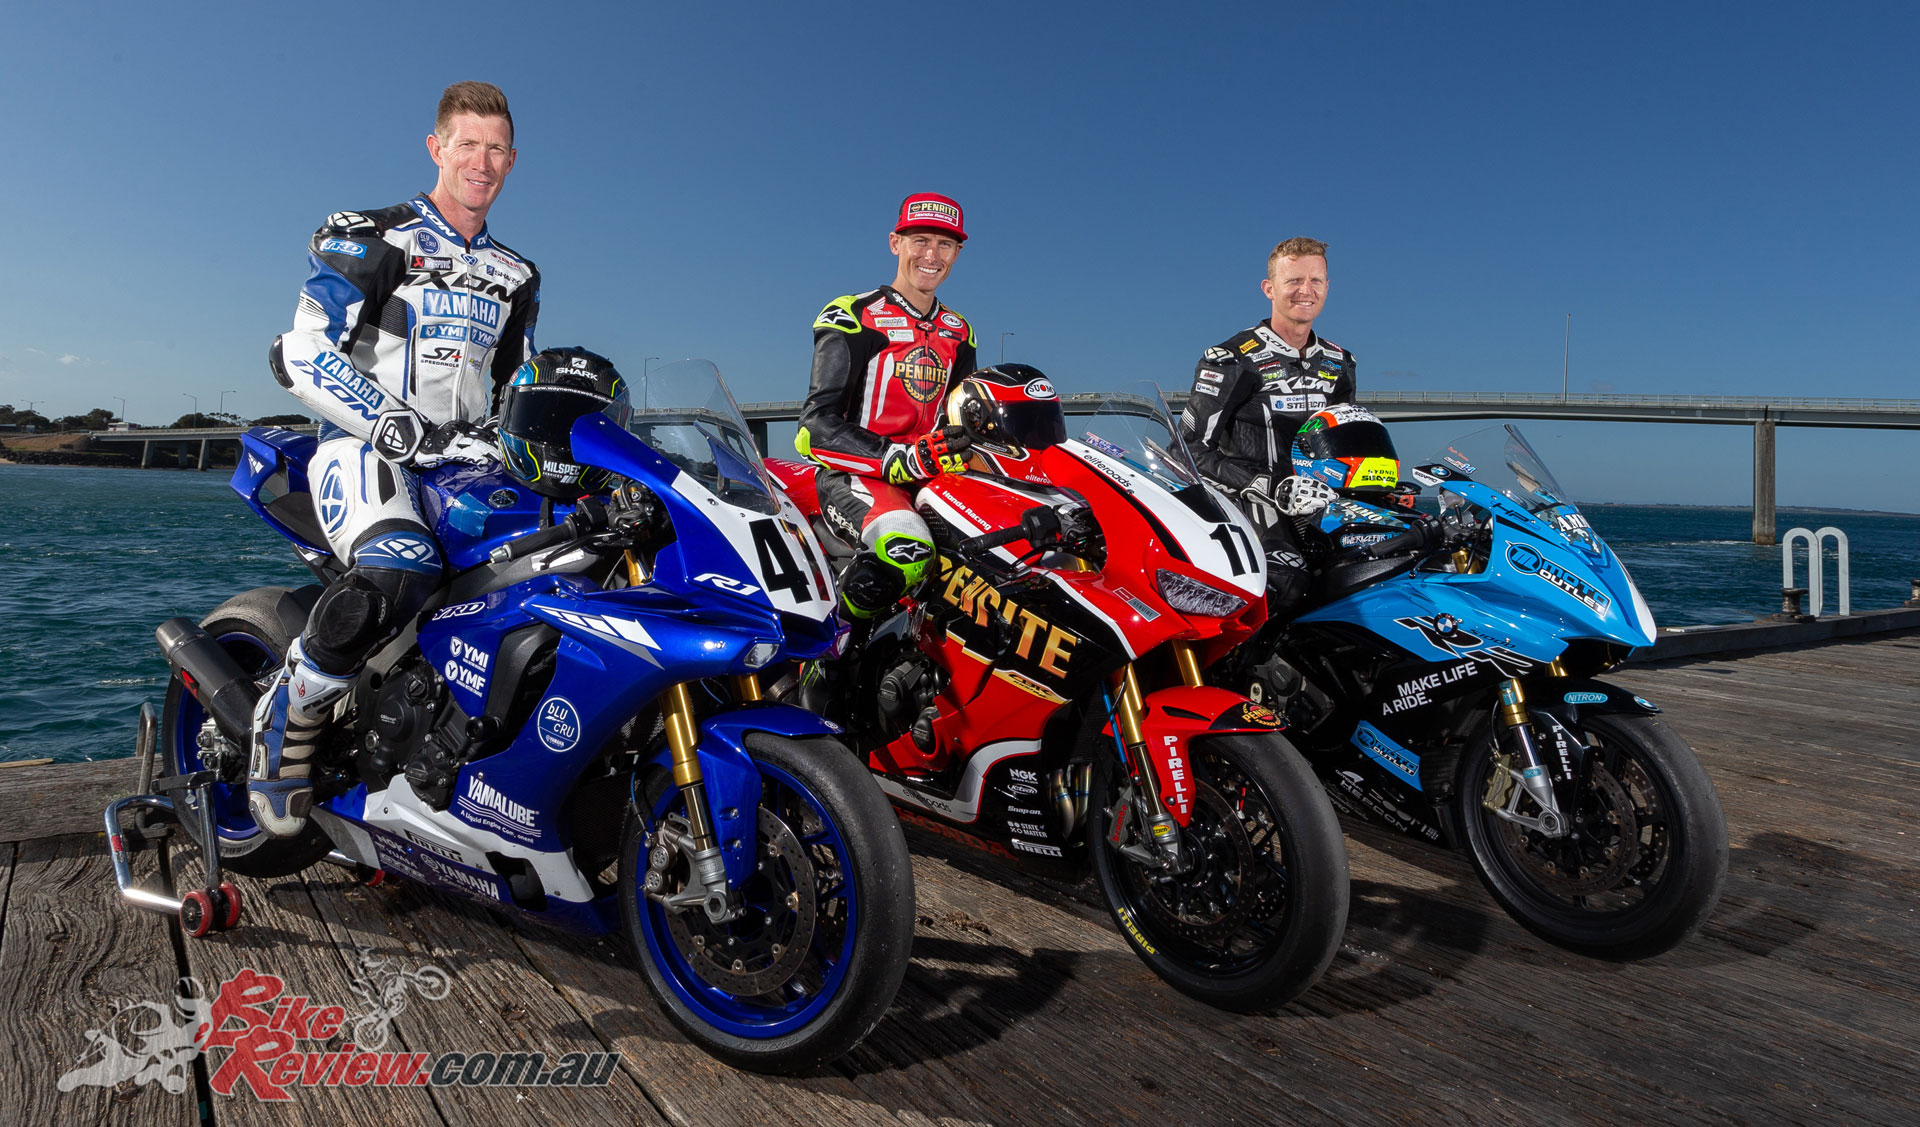 ASBK heads to Phillip Island for Round 7, 2018